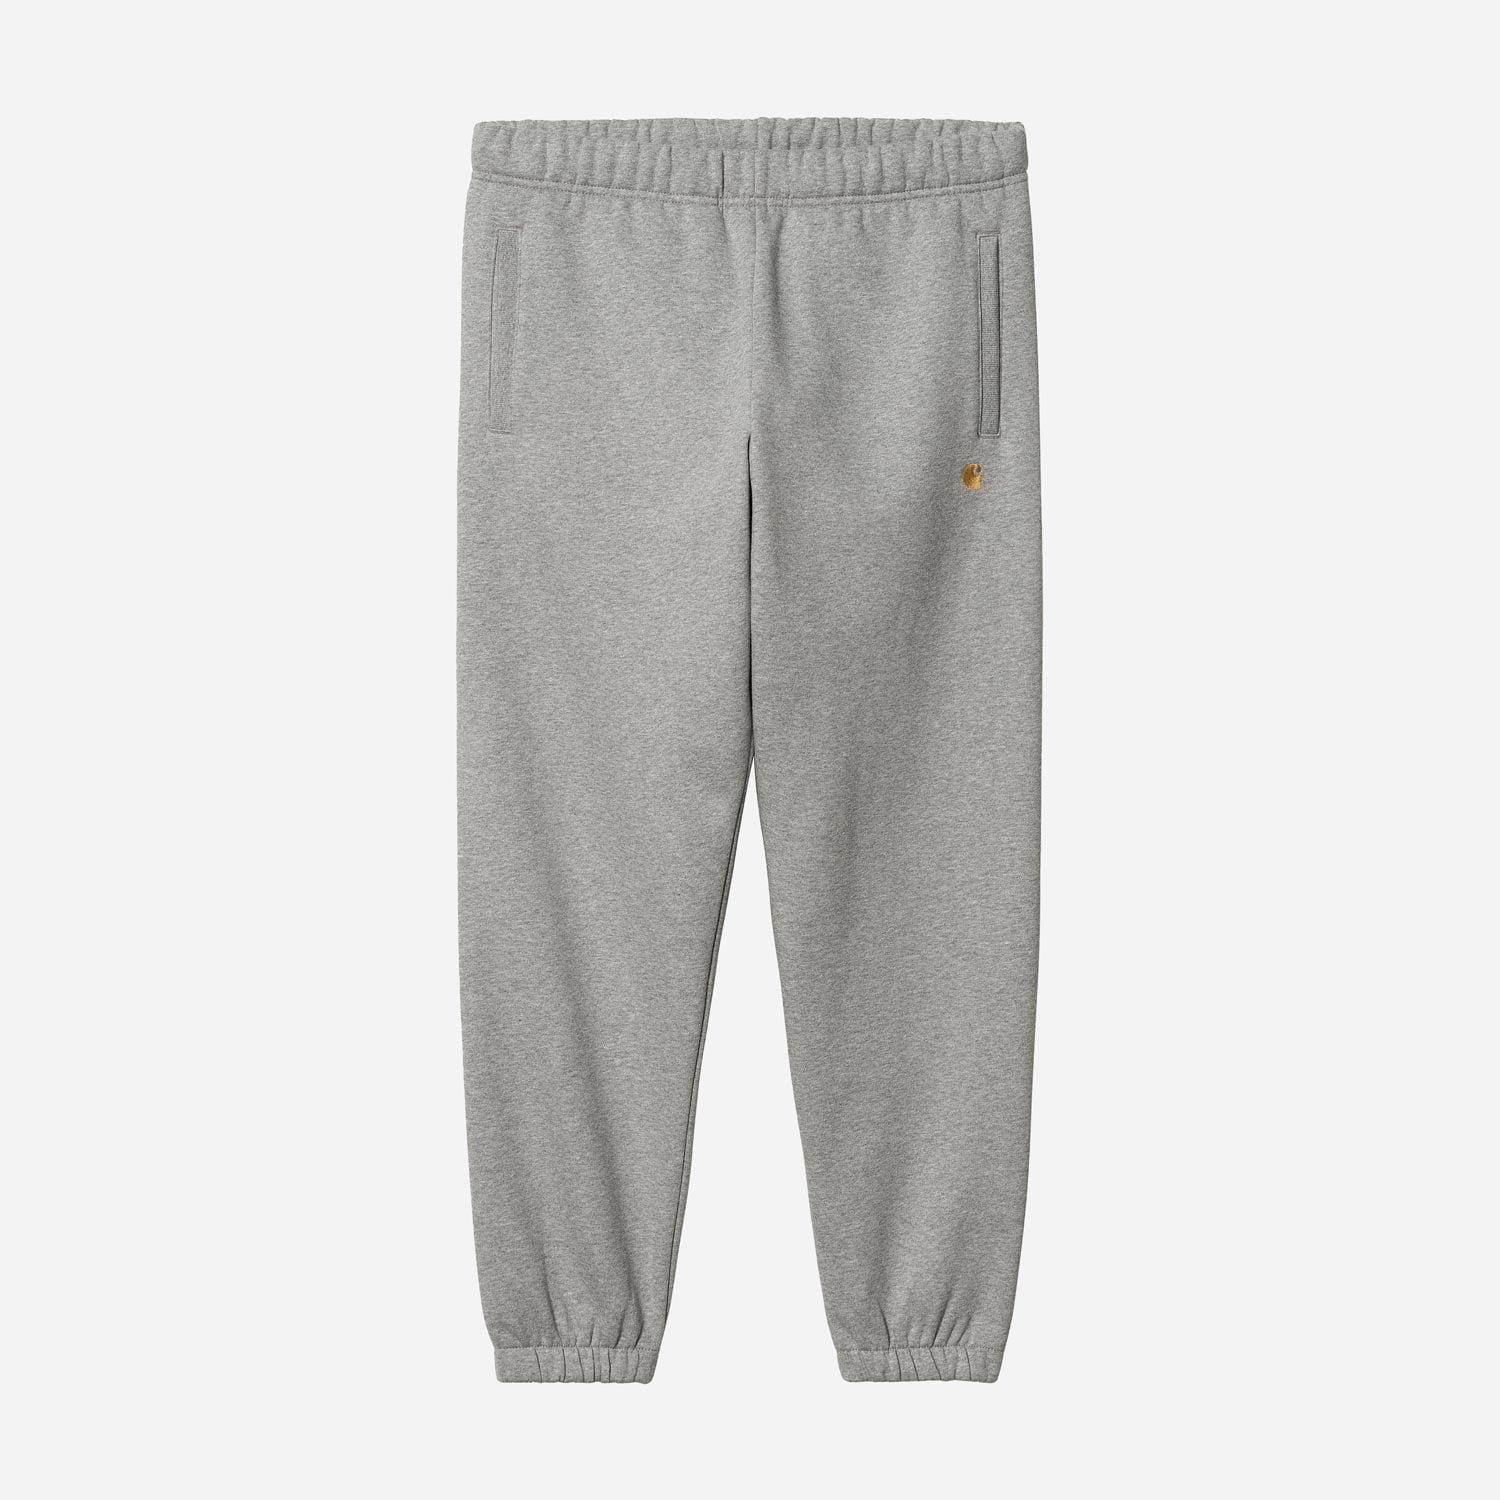 Carhartt WIP Chase Sweatpant - Grey Heather/Gold